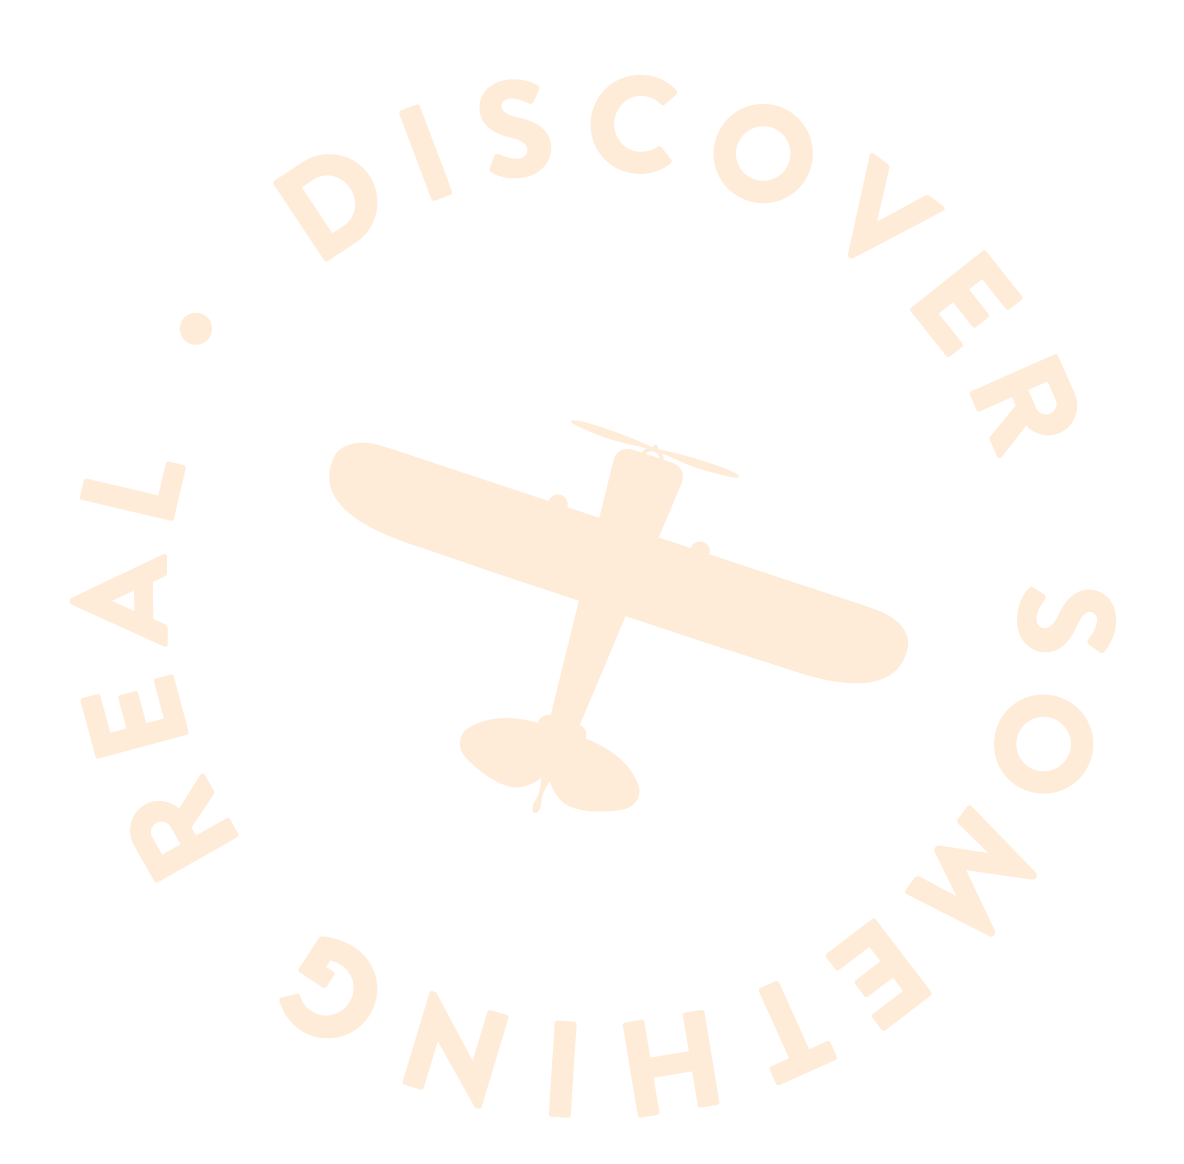 discover-something-real-logo